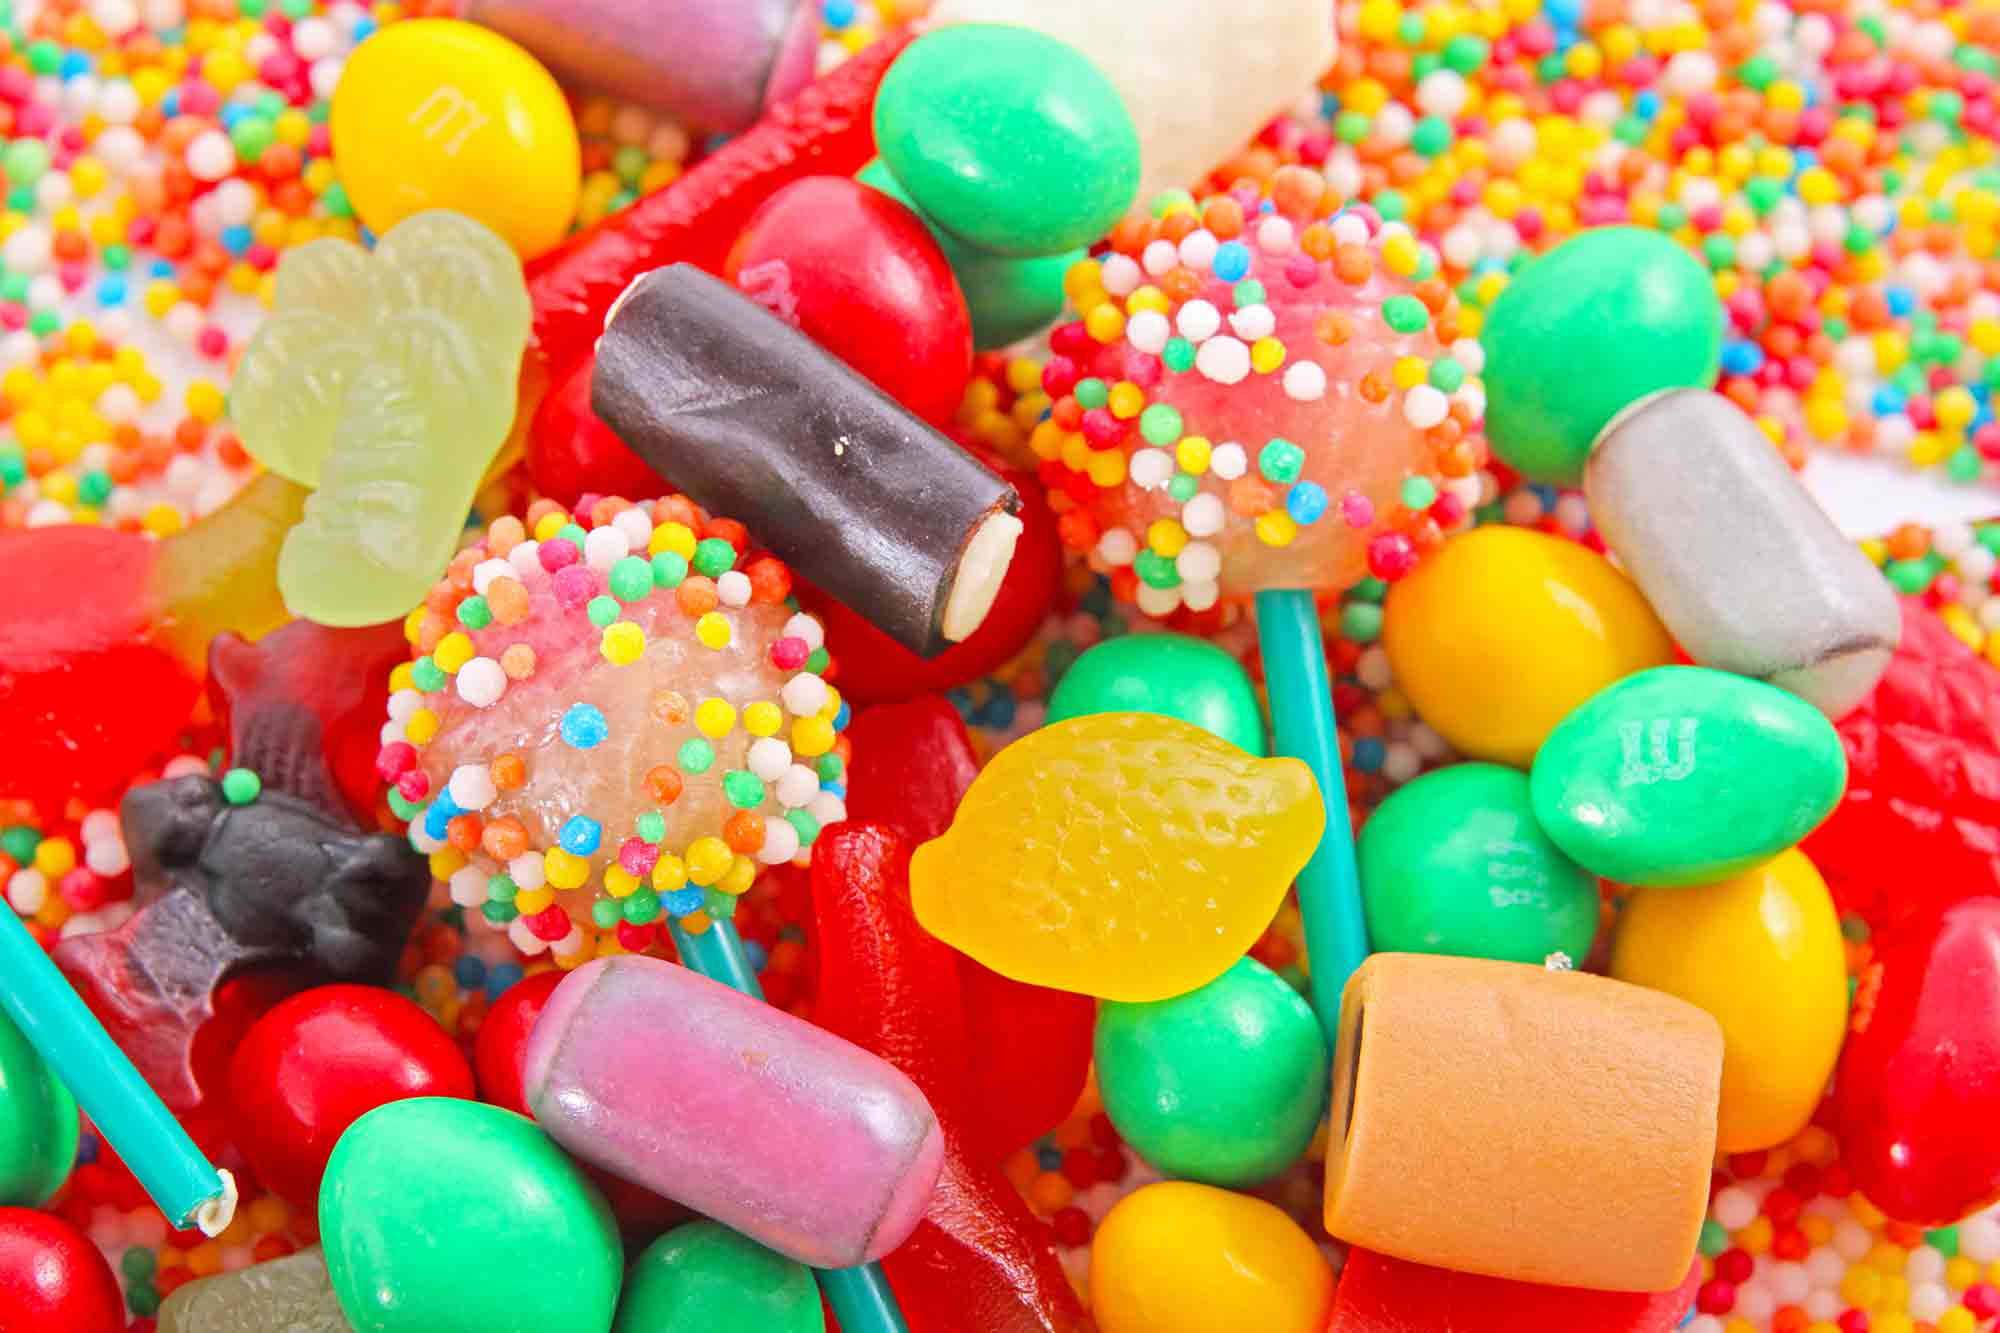 More than half of UK parents say they restrict their children's sugar levels 